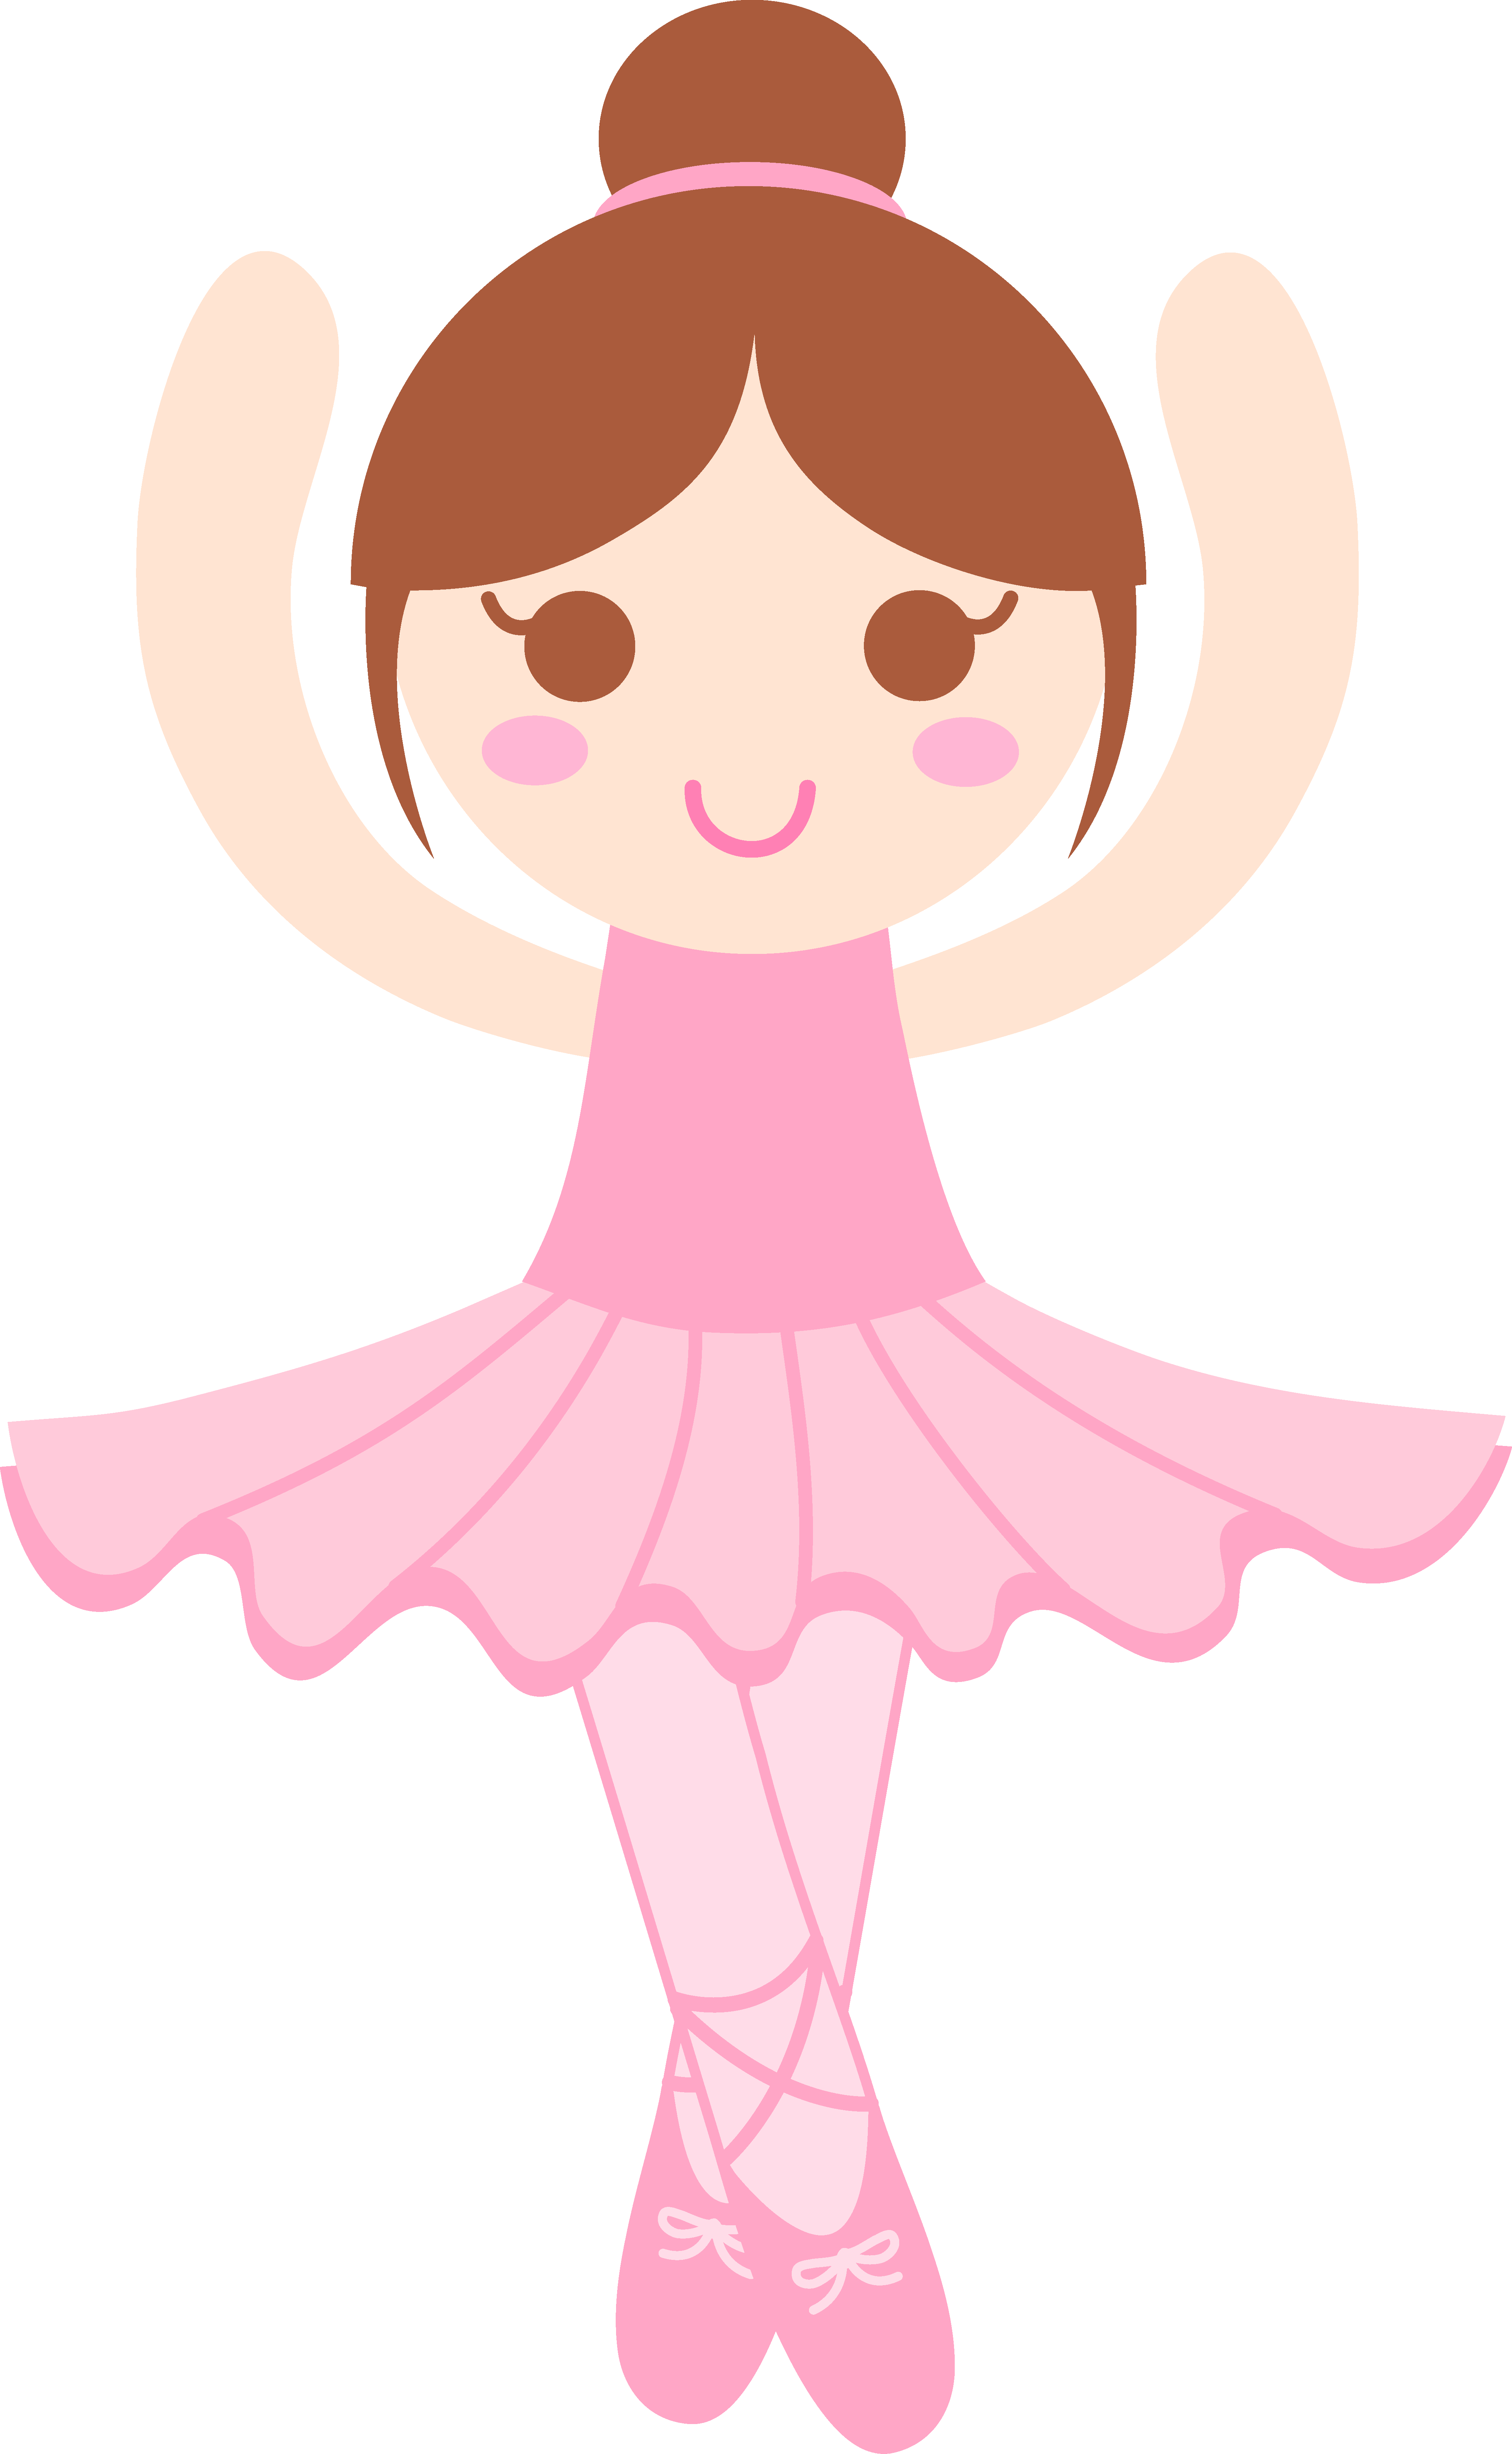 Ballerina Slippers Drawing : Ballet Slippers Clipart Shoes Clipartmag ...